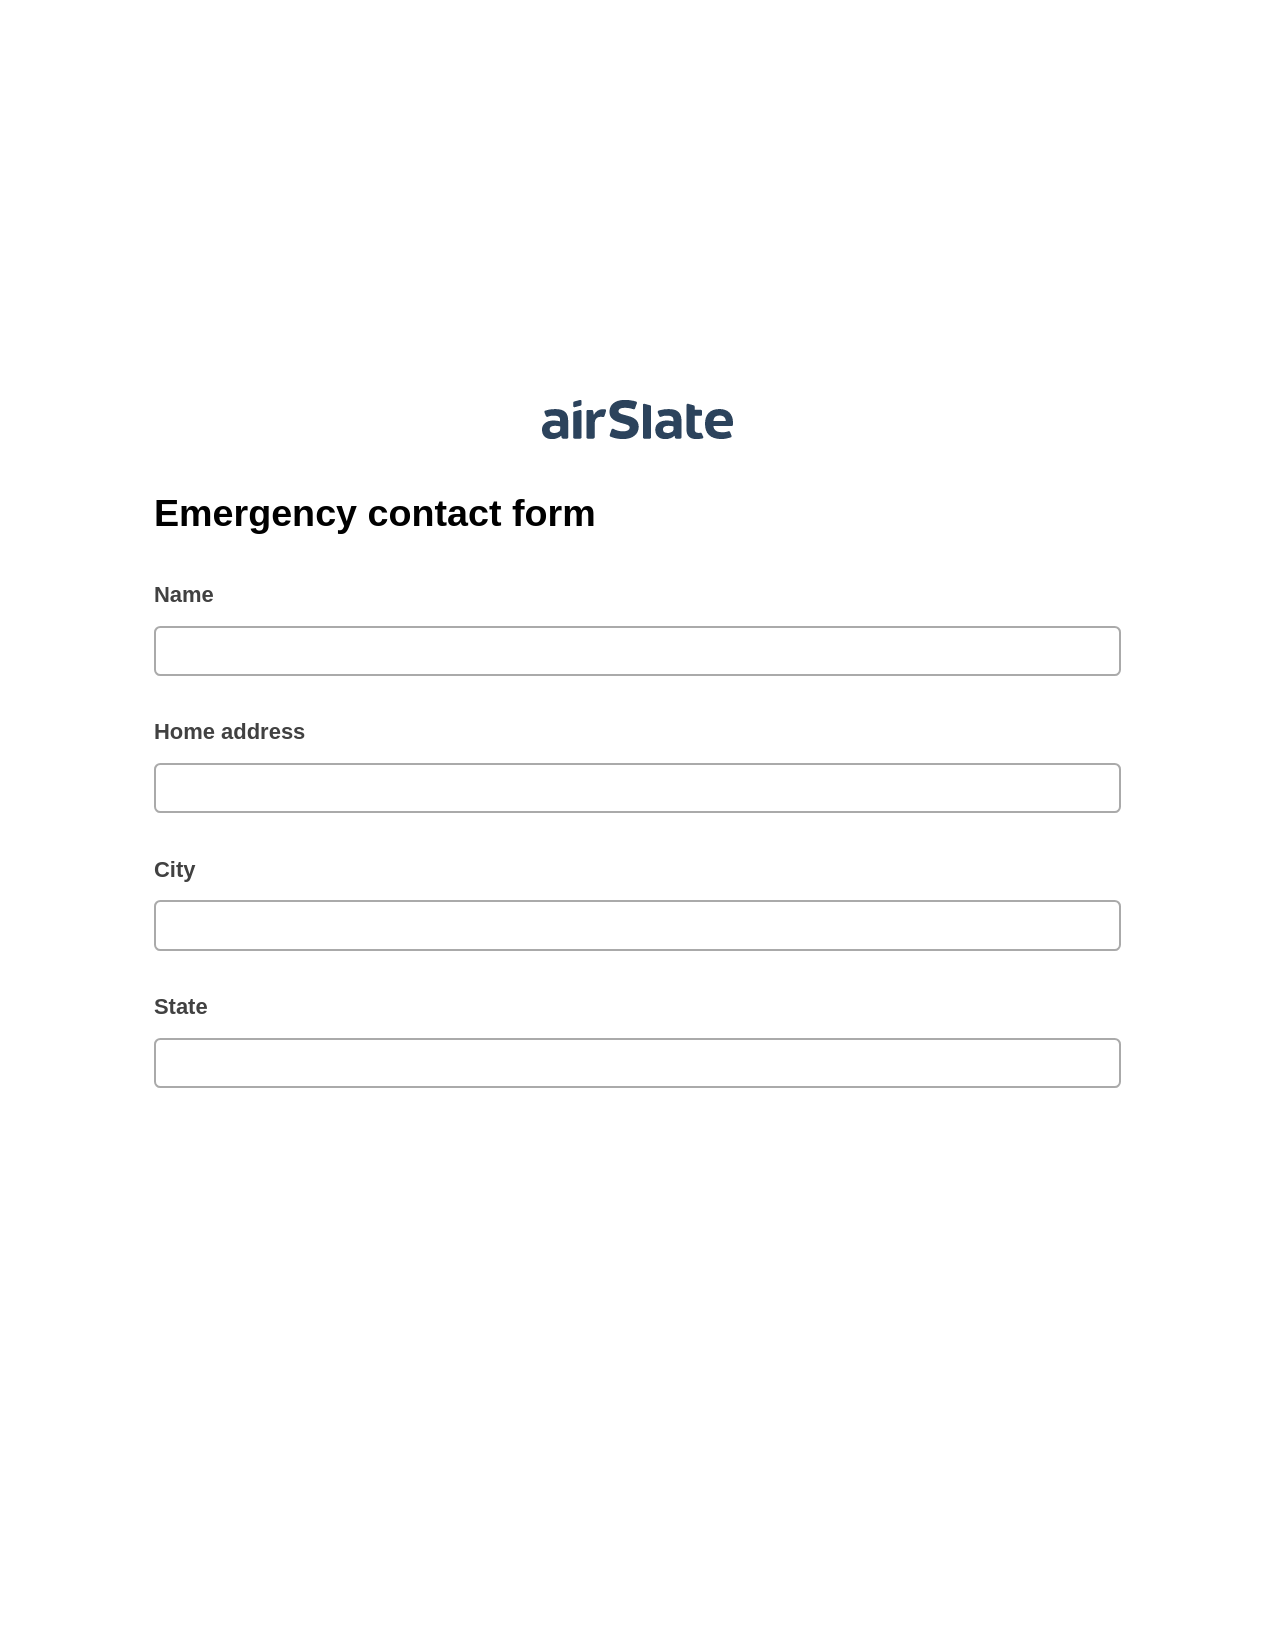 Multirole Emergency contact form Pre-fill Slate from MS Dynamics 365 Records Bot, Webhook Bot, Export to Formstack Documents Bot